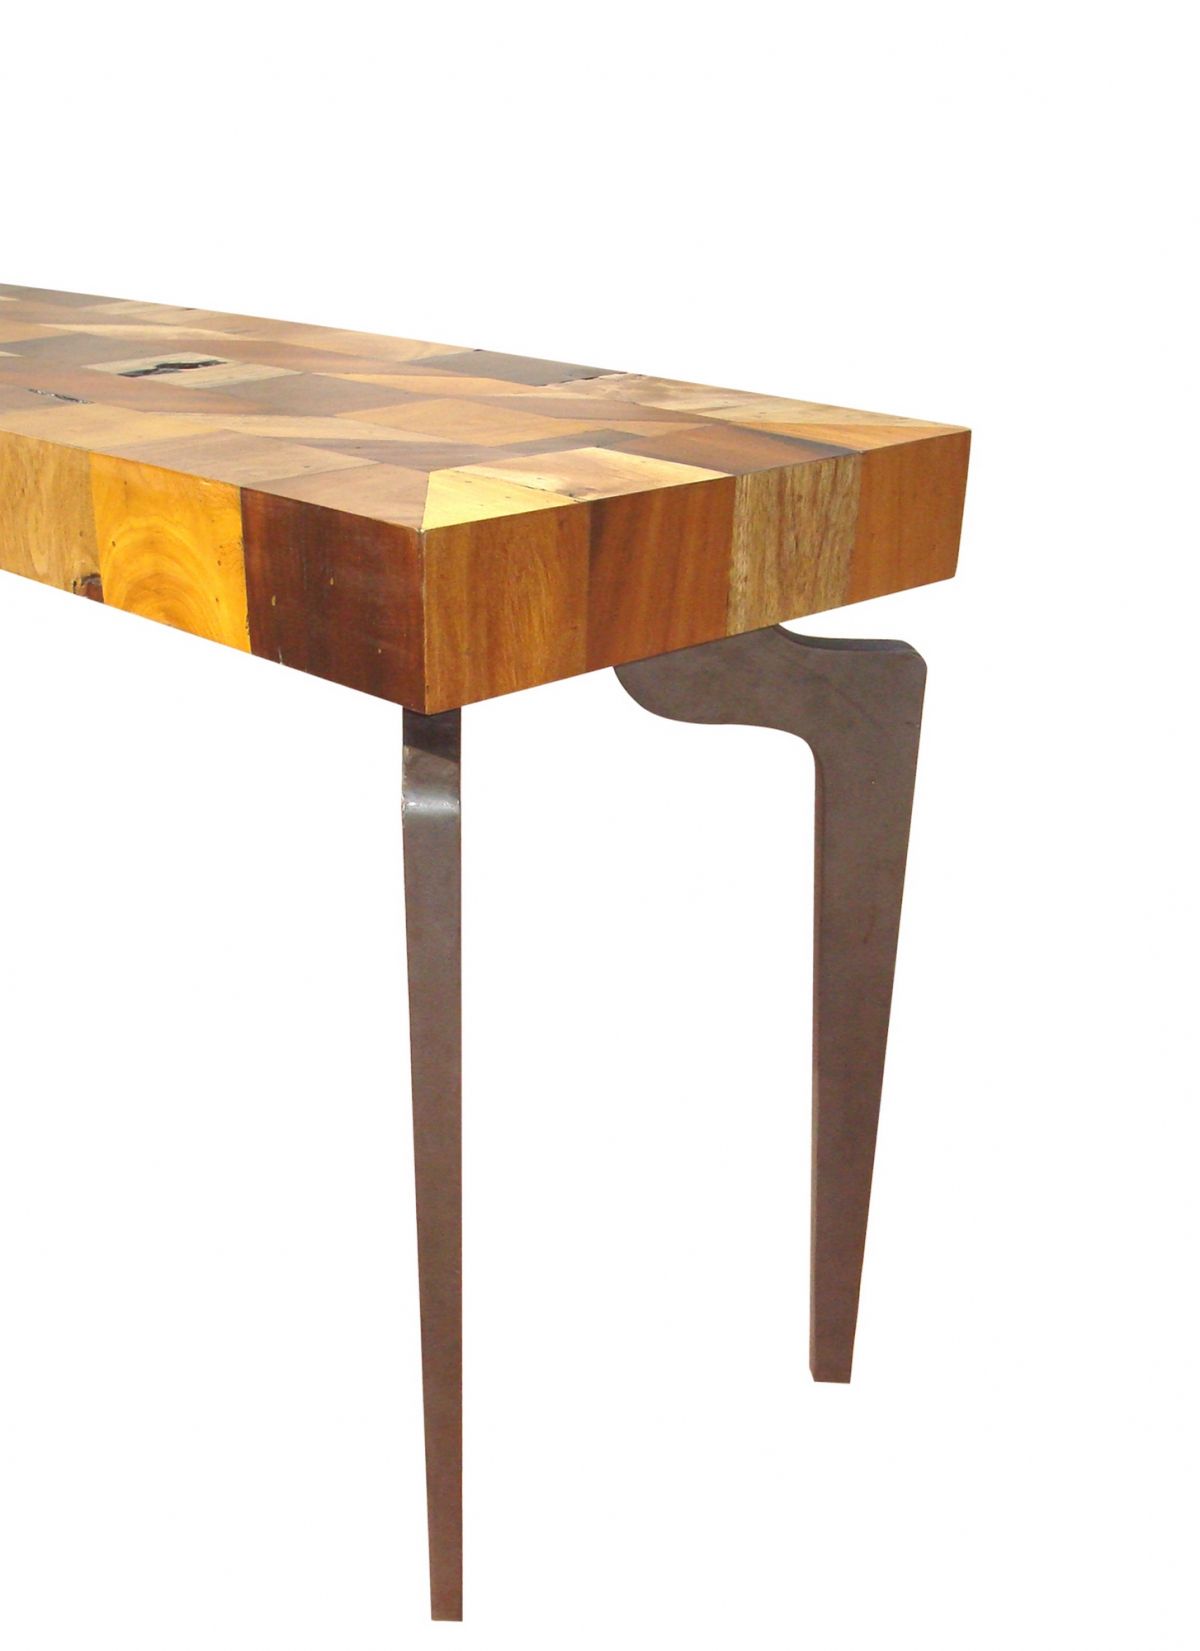 Oak Wood And Metal Legs Console Tables With Most Current Gajel Console Table With Metal Legs (View 1 of 10)